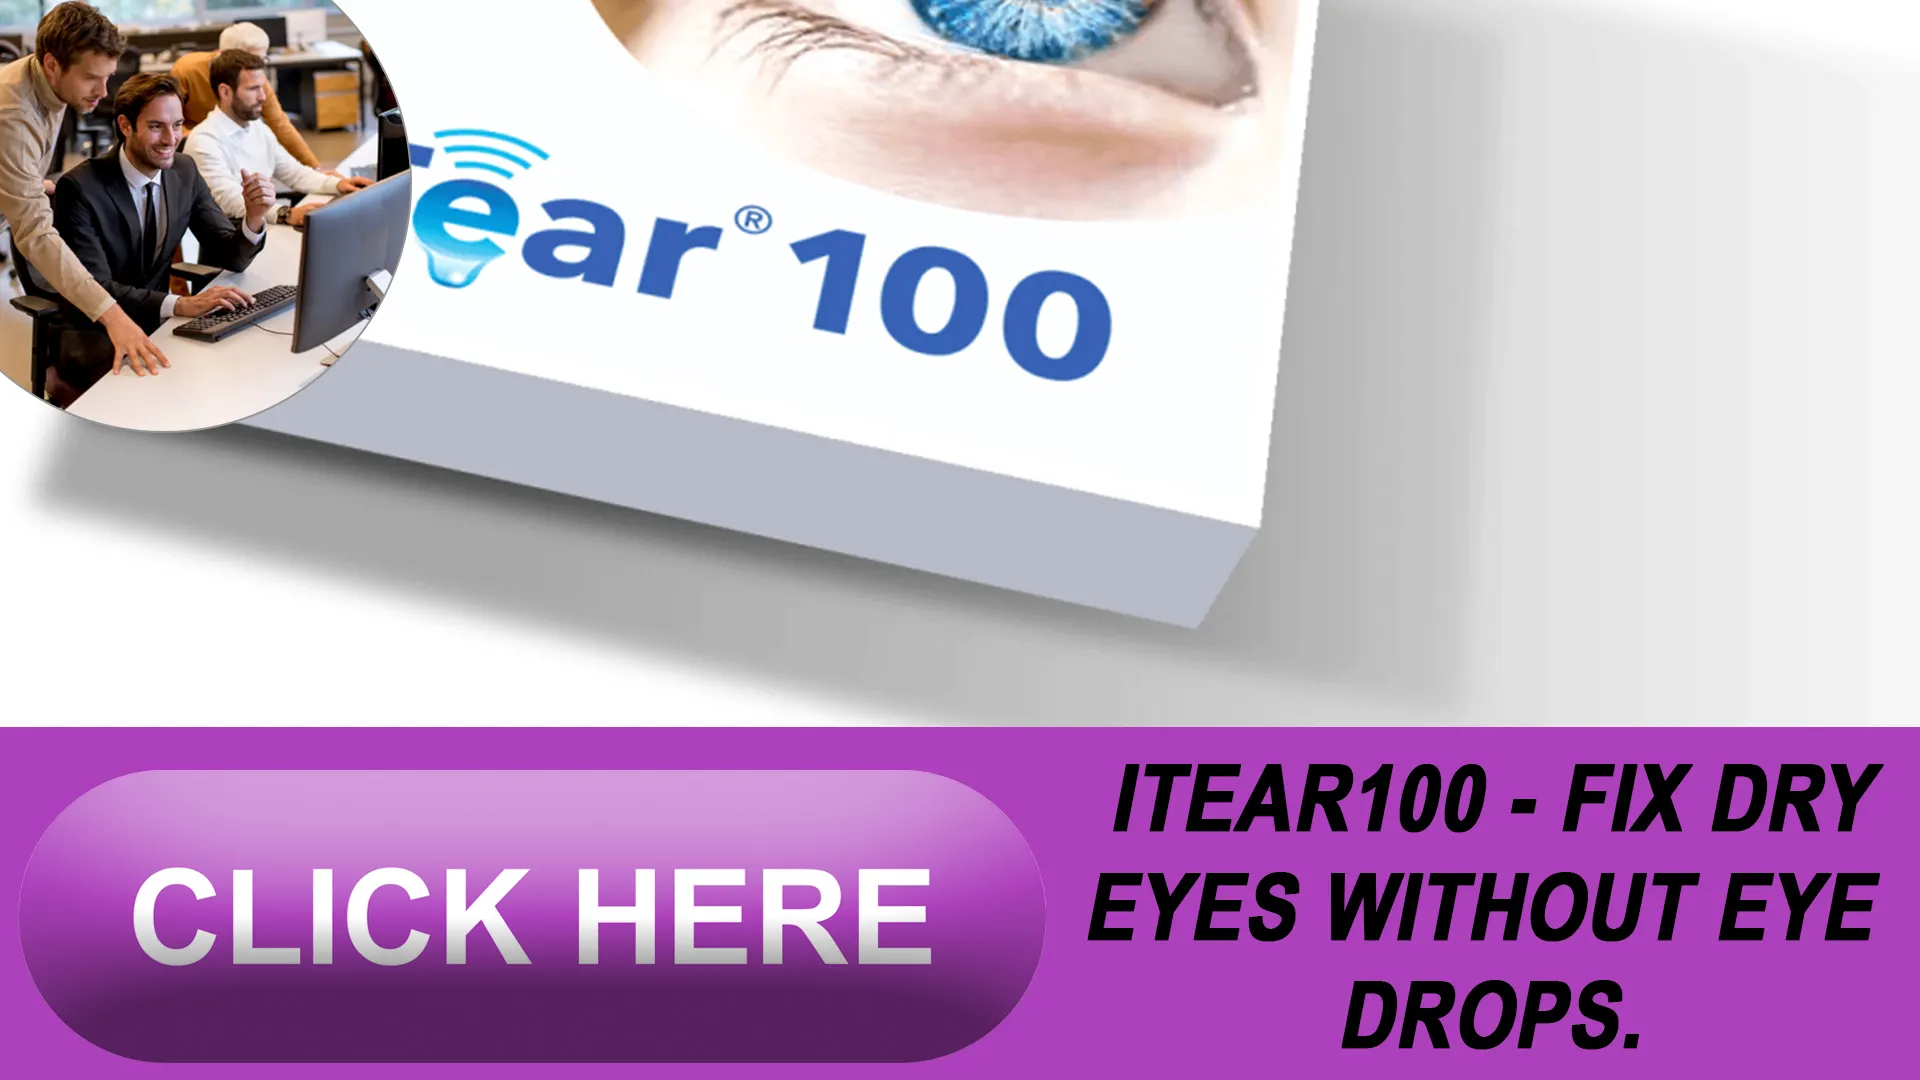  Getting Started with iTEAR100